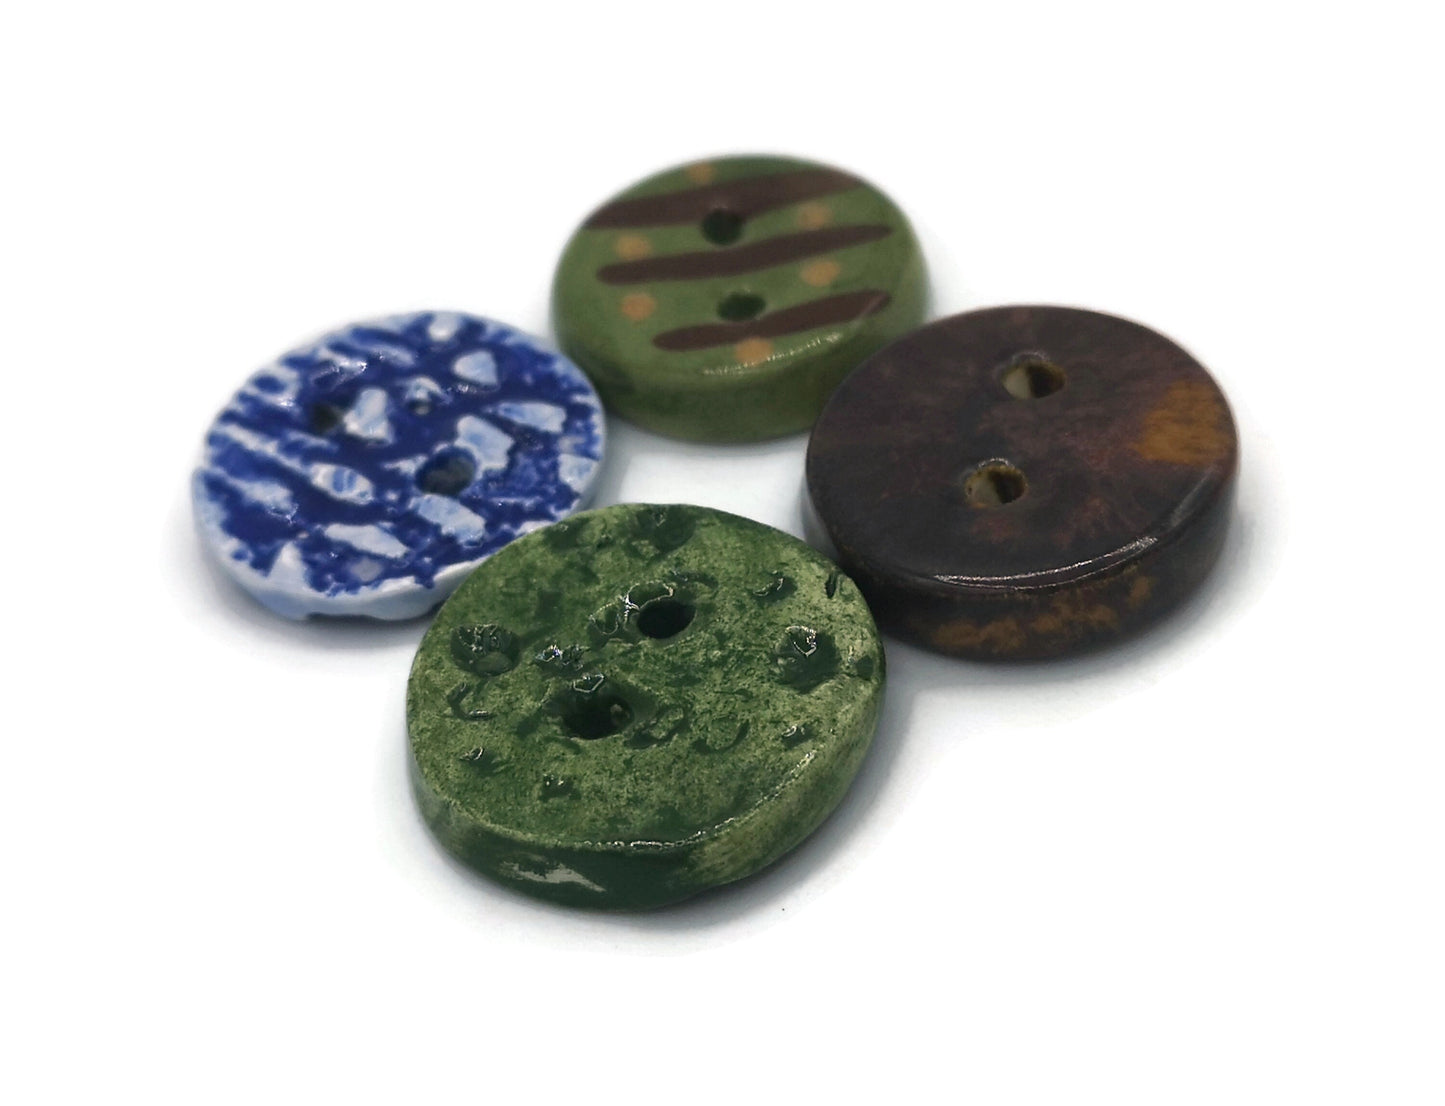 4Pc 30mm Handmade Ceramic Sewing Buttons, Round Large Buttons, Coat Buttons, Jewelry Making Buttons Antique Look, Sewing Supplies and Notion - Ceramica Ana Rafael